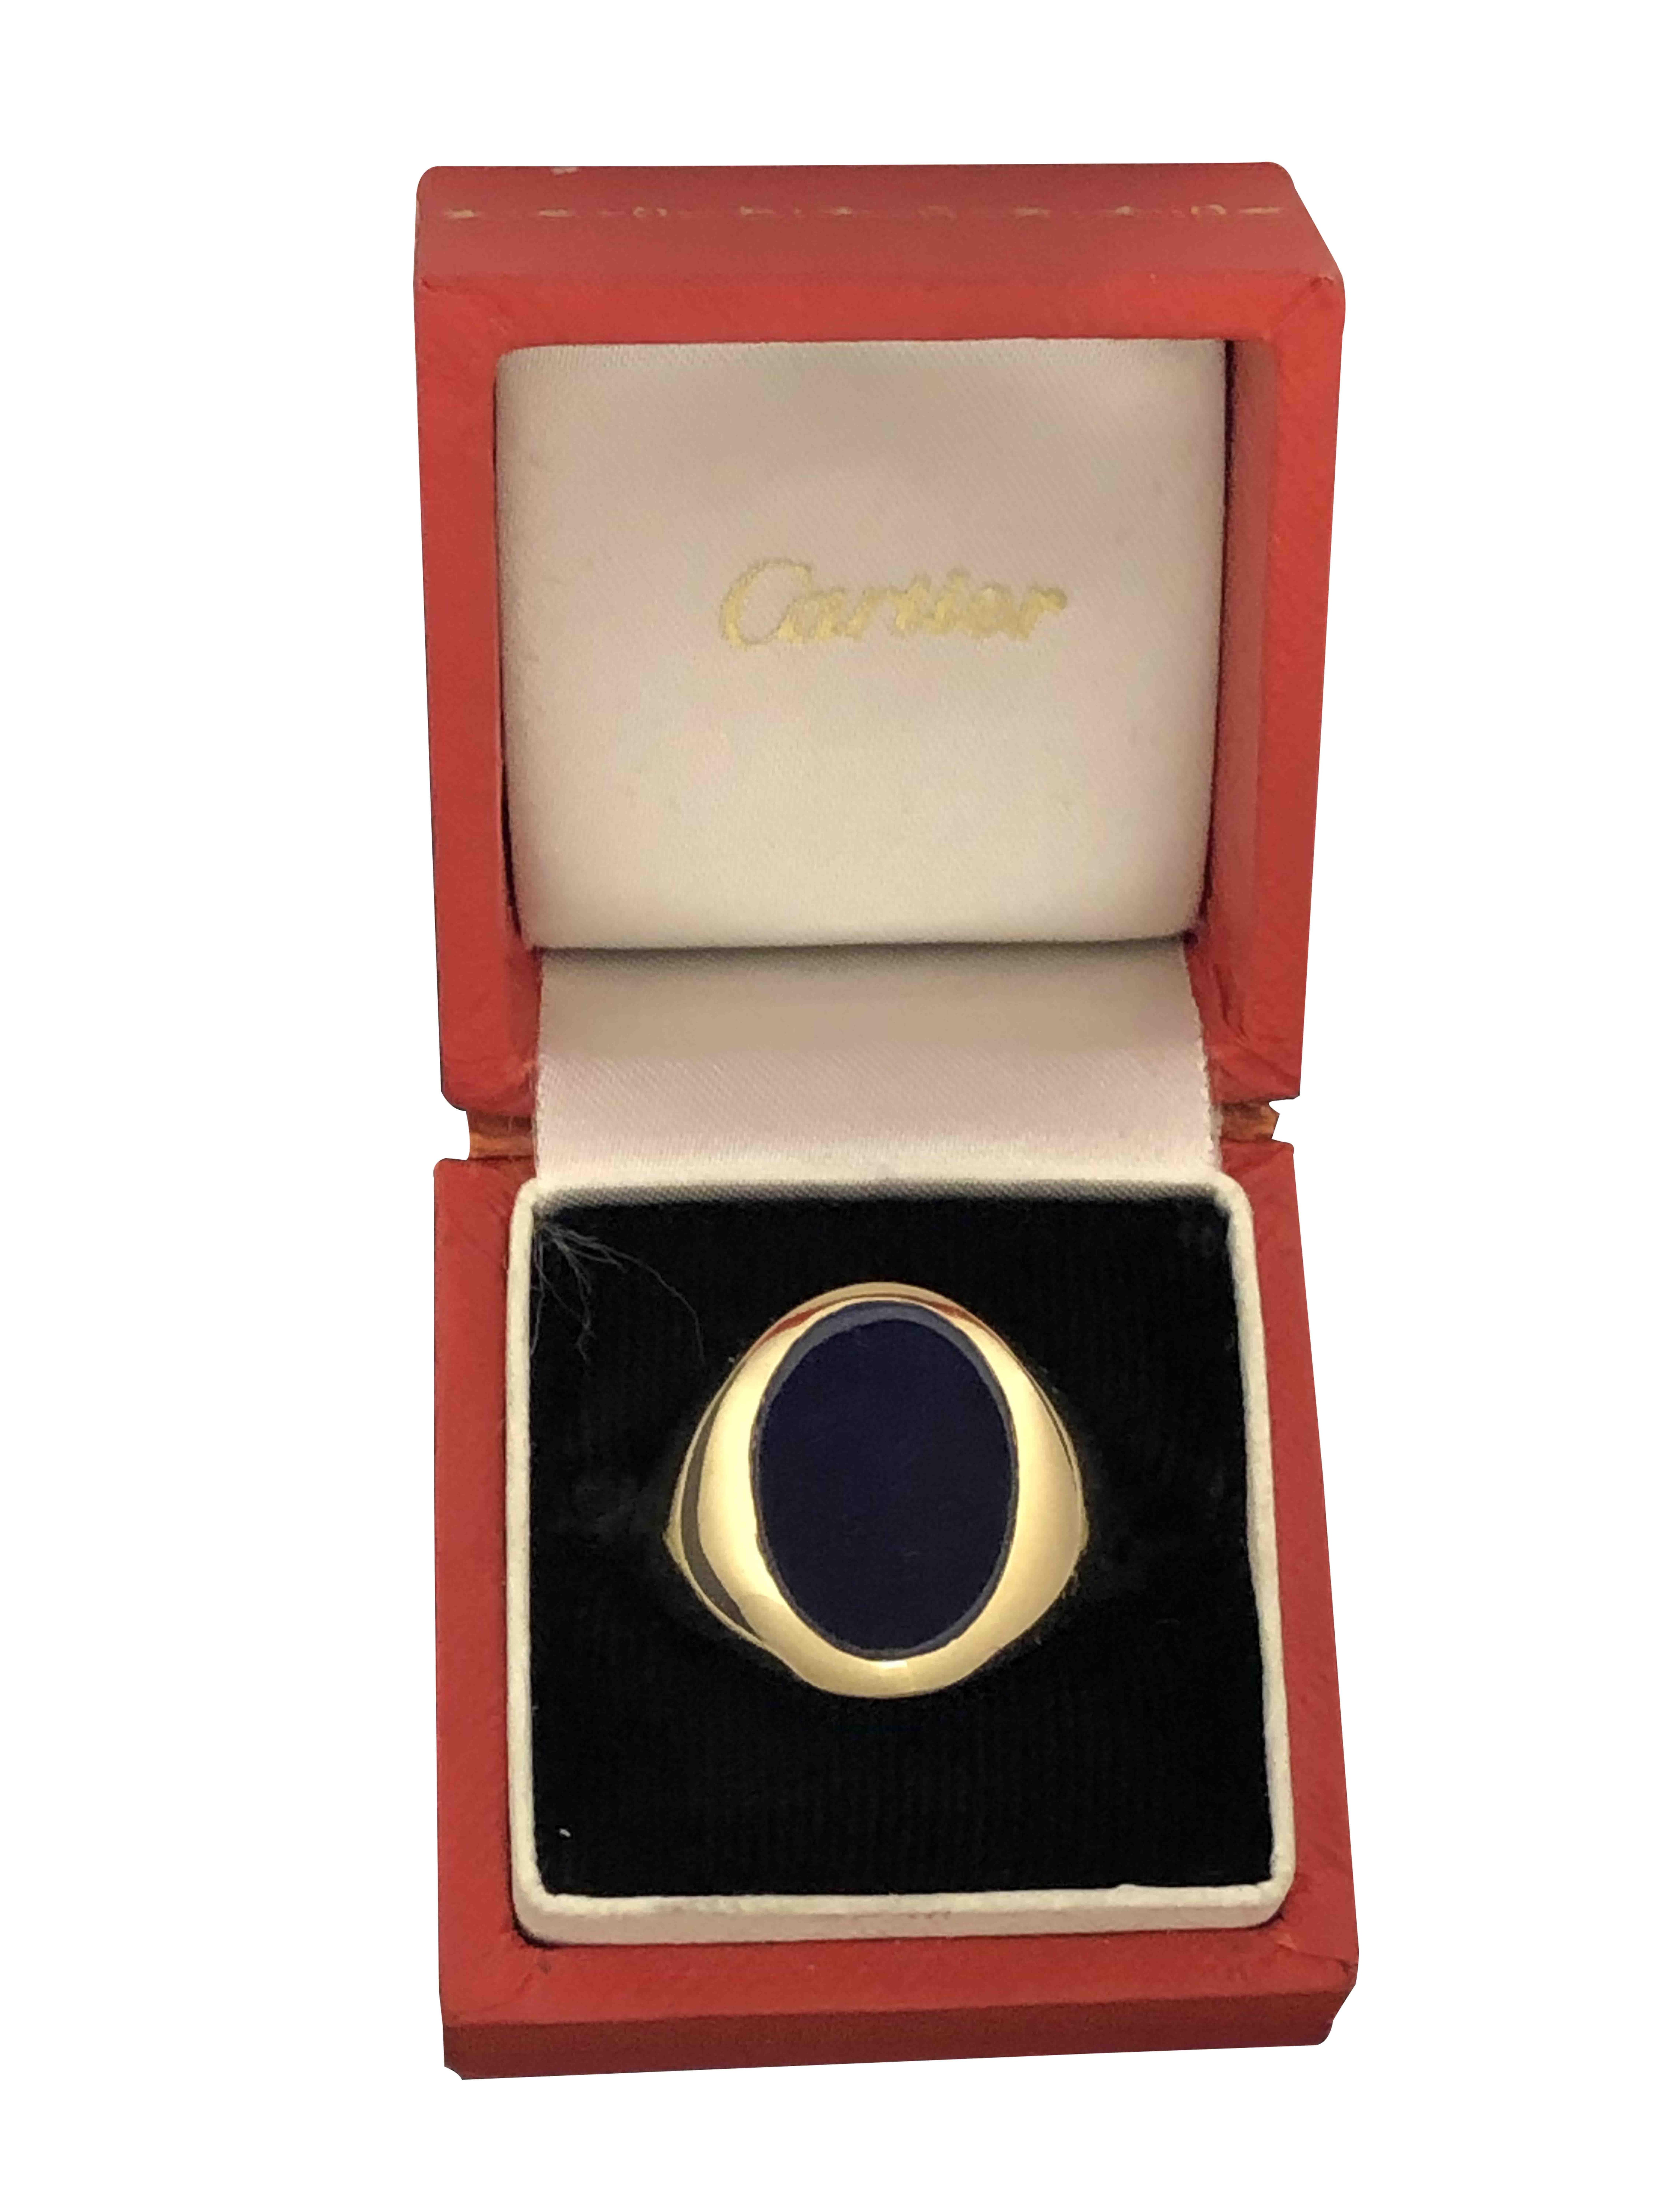 Circa 1950s Cartier Gents 14K Yellow Gold Signet Ring, originally sold as a Signet ring for custom engraving or to be worn with no engraving. measuring 3/4 inch across the top X 5/8 inch wide, and set with a very Fine color Lapis Lazuli,  finger